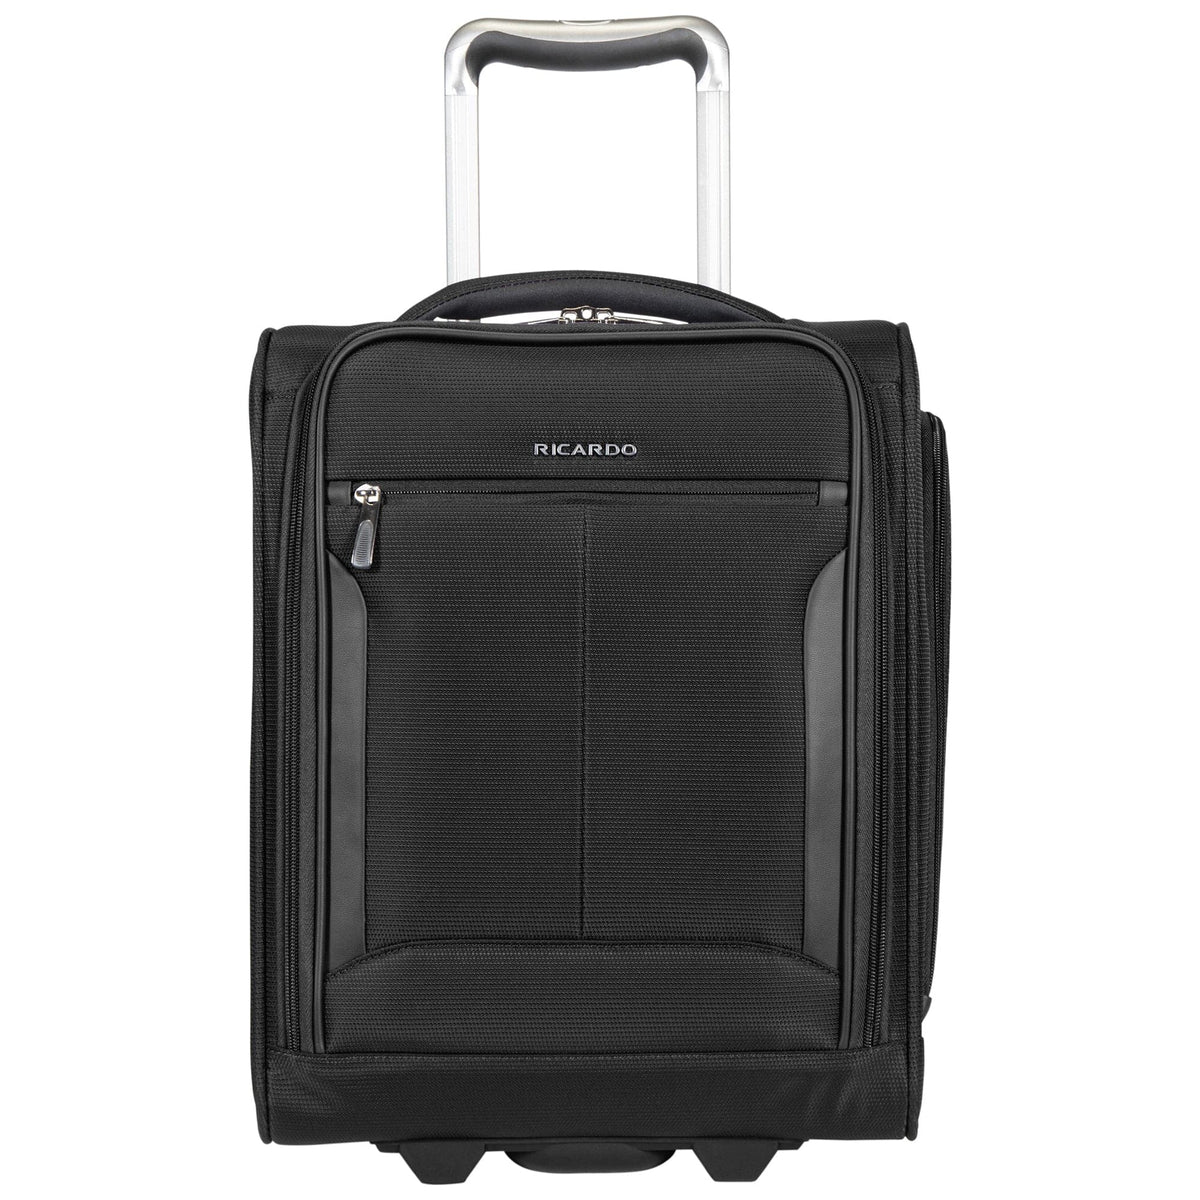 Ricardo Beverly Hills Seahaven 2.0 Underseat Carry-On Luggage